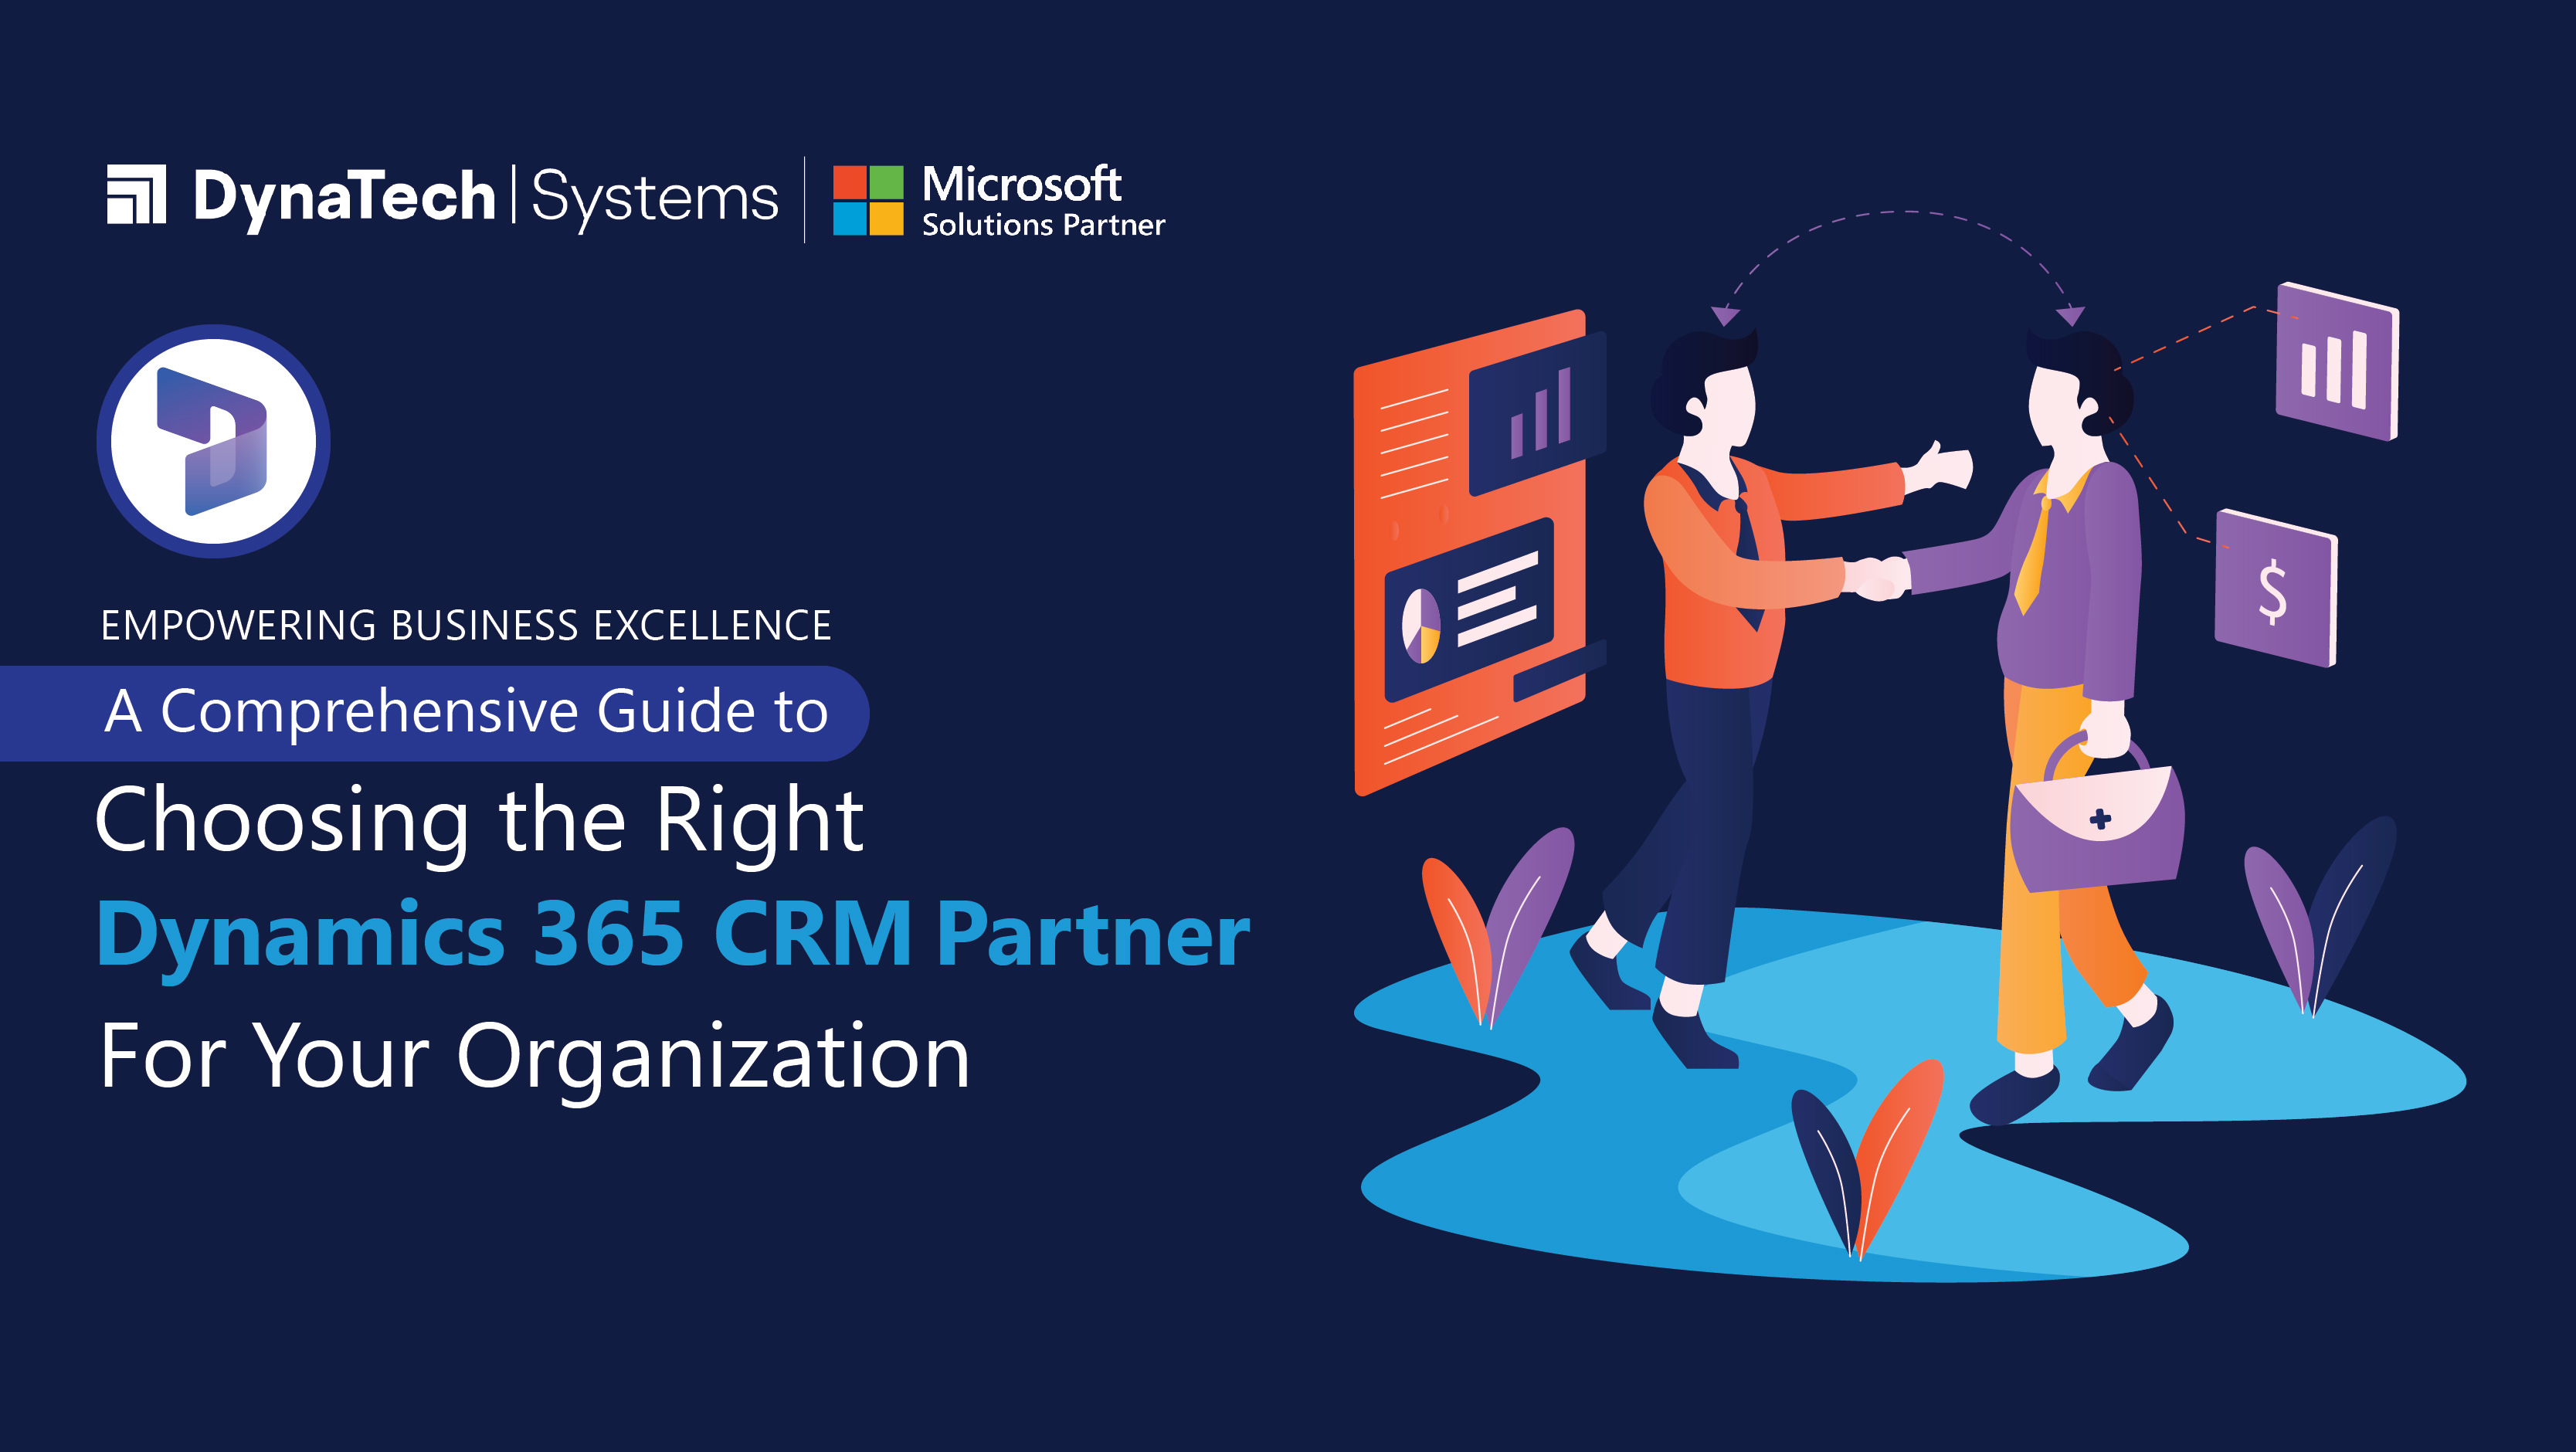 Empowering Business Excellence: A Comprehensive Guide to Choosing the Right Dynamics 365 CRM Partner for Your Organization